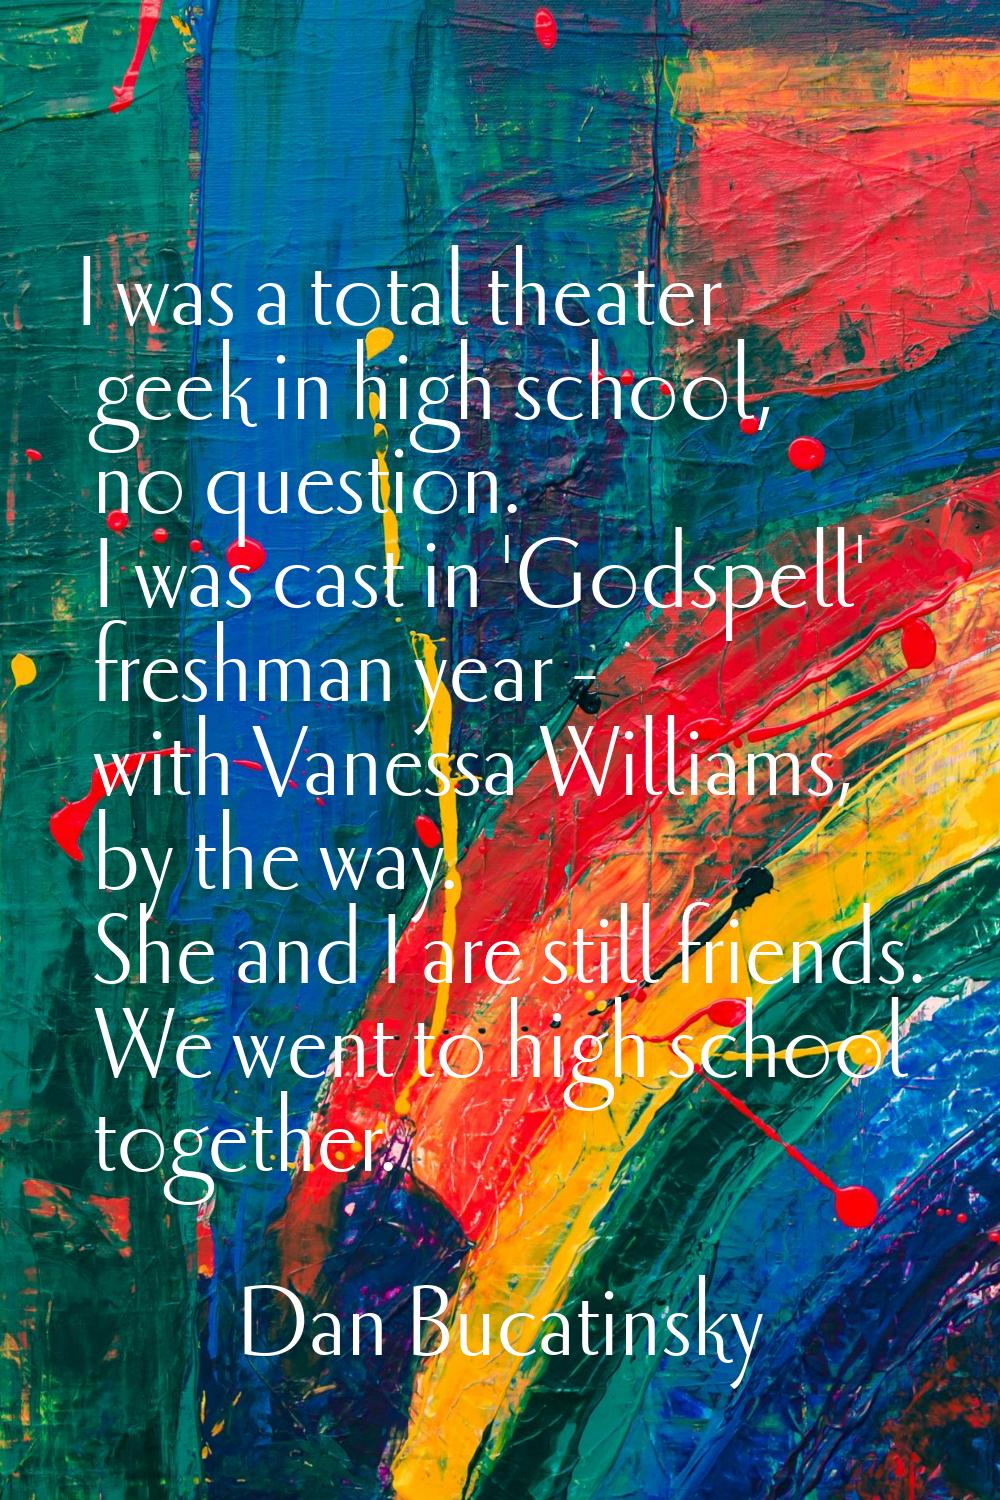 I was a total theater geek in high school, no question. I was cast in 'Godspell' freshman year - wi